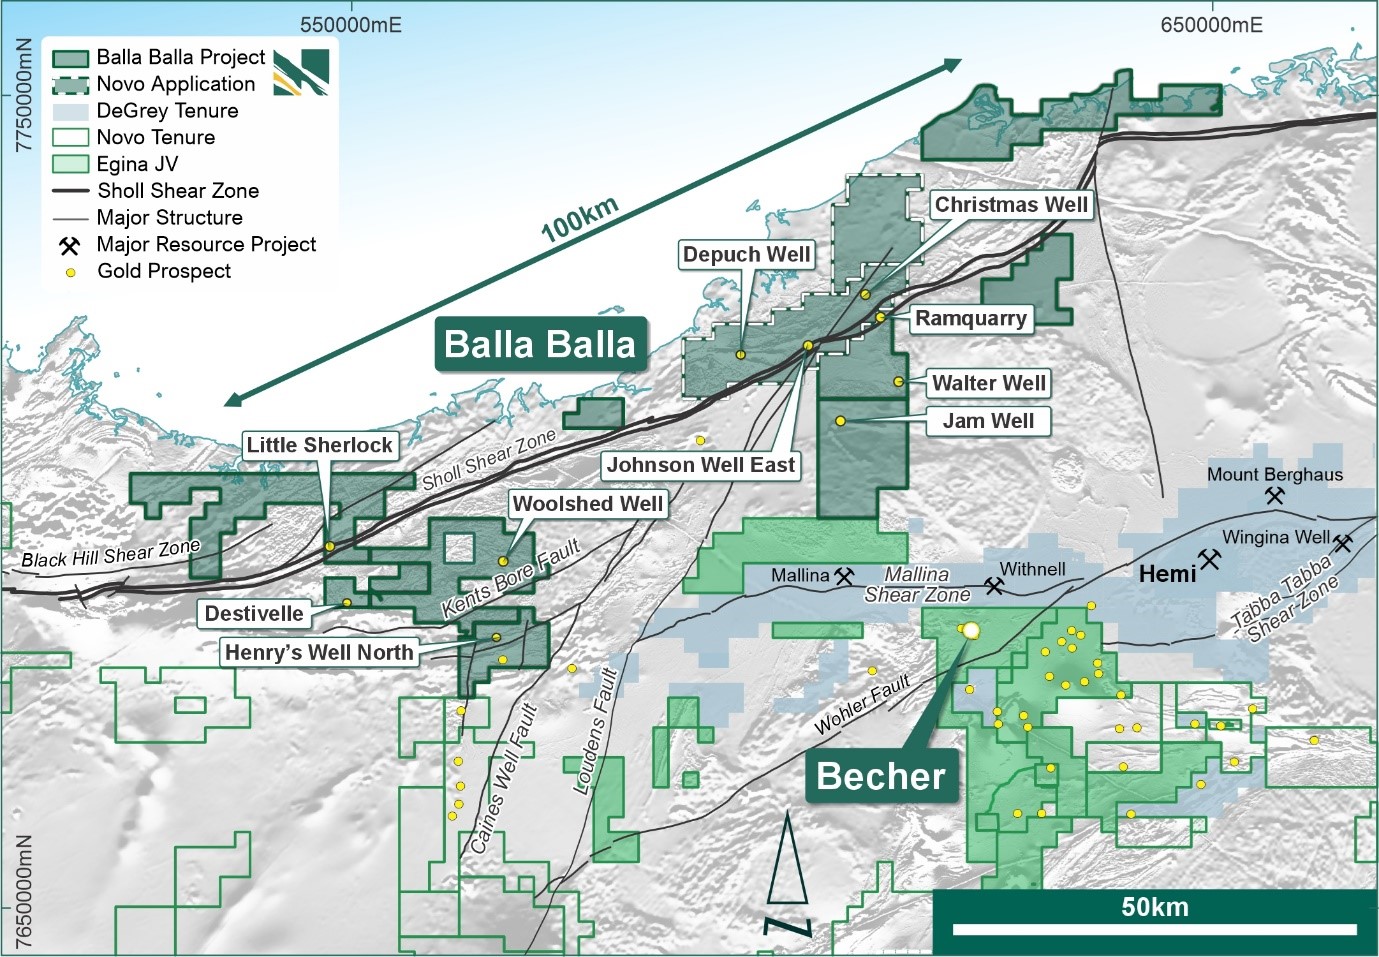 Location and tenure of the Balla Balla Gold Project, with preliminary structural interpretation and key prospects. Location of the Egina earn-in/JV tenure with De Grey in light green.